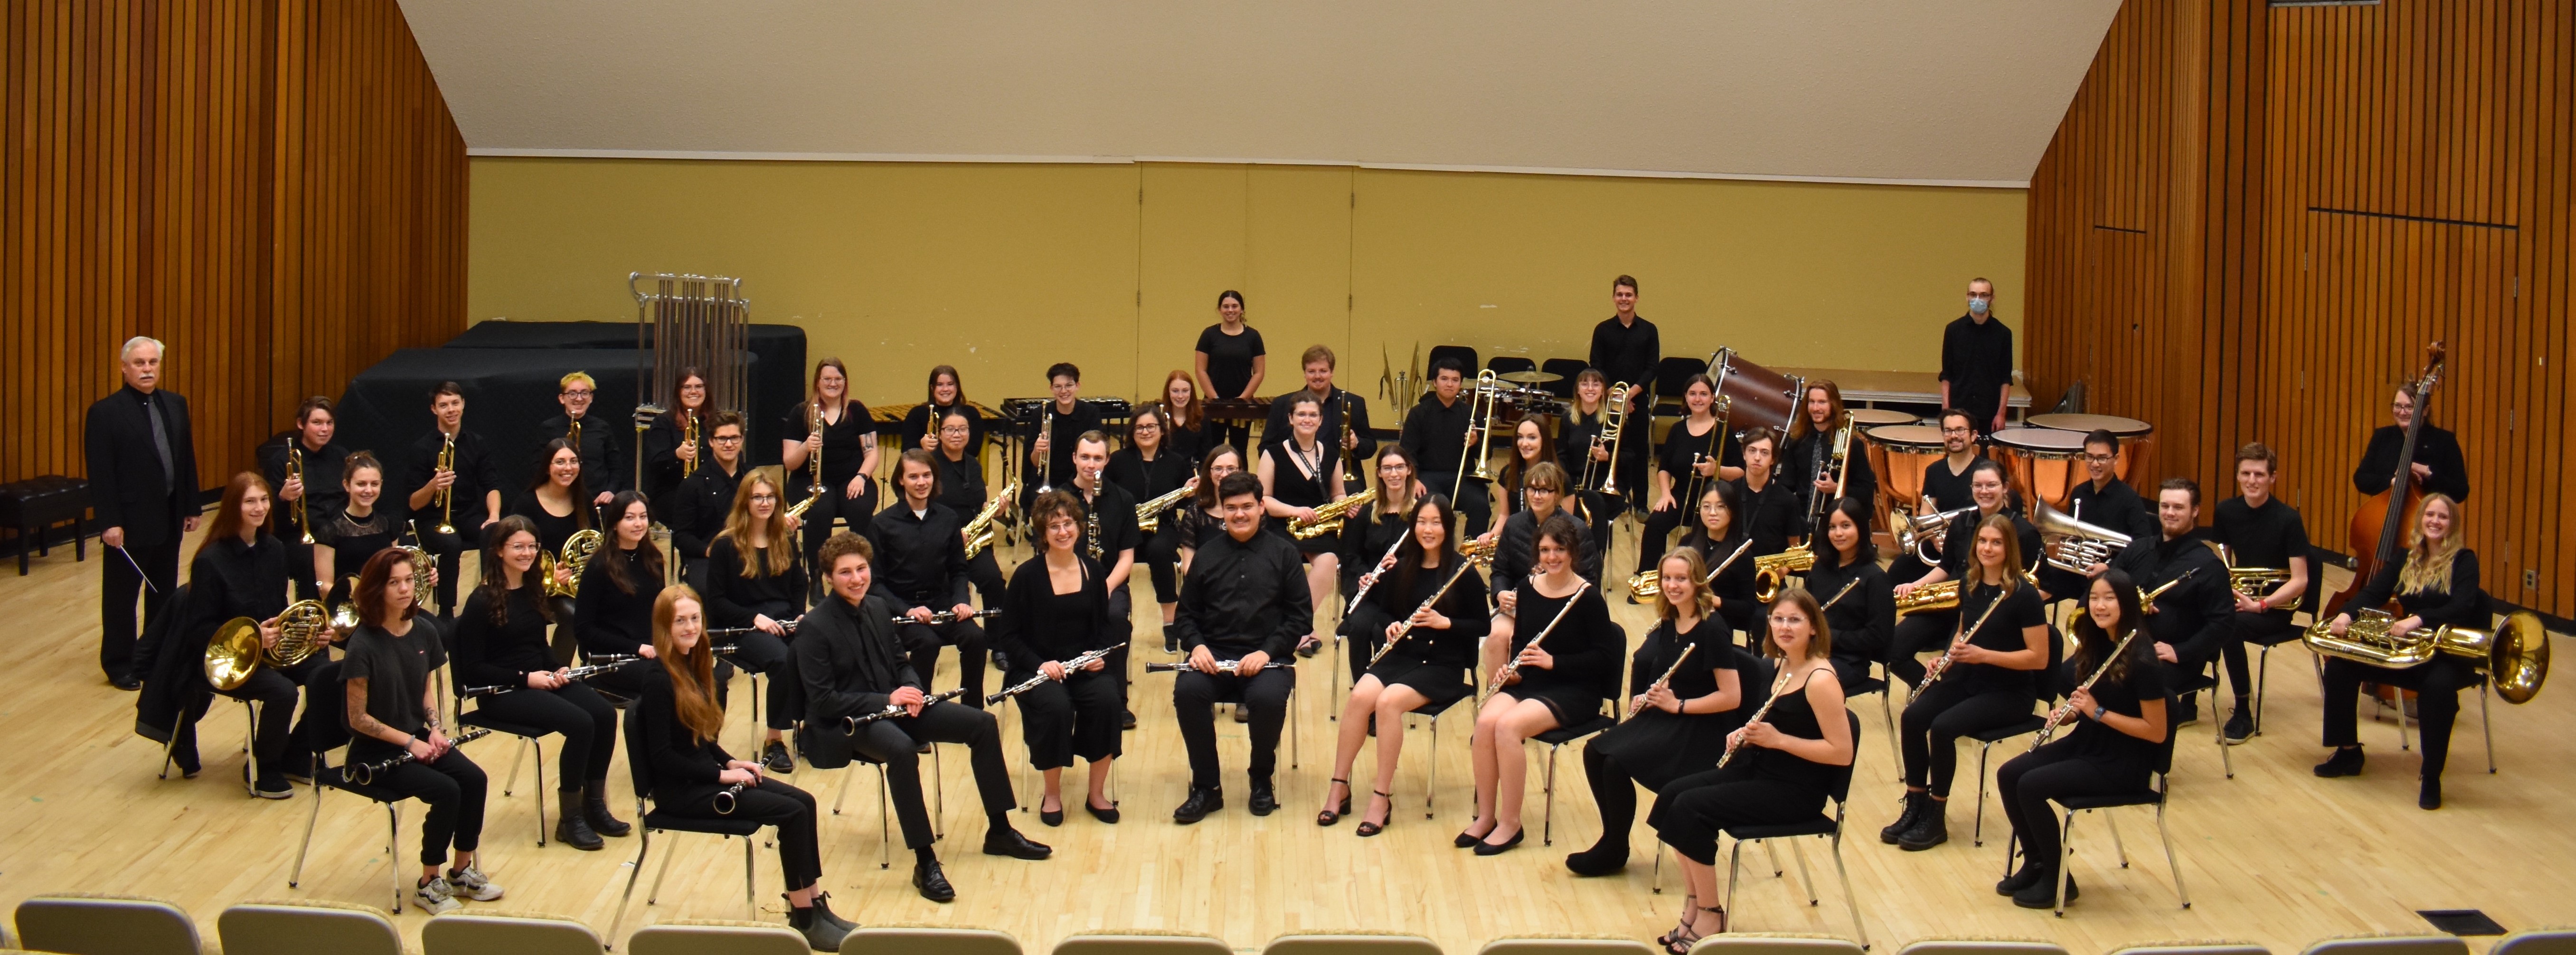 2019-20 U of S Concert Band Group Photo